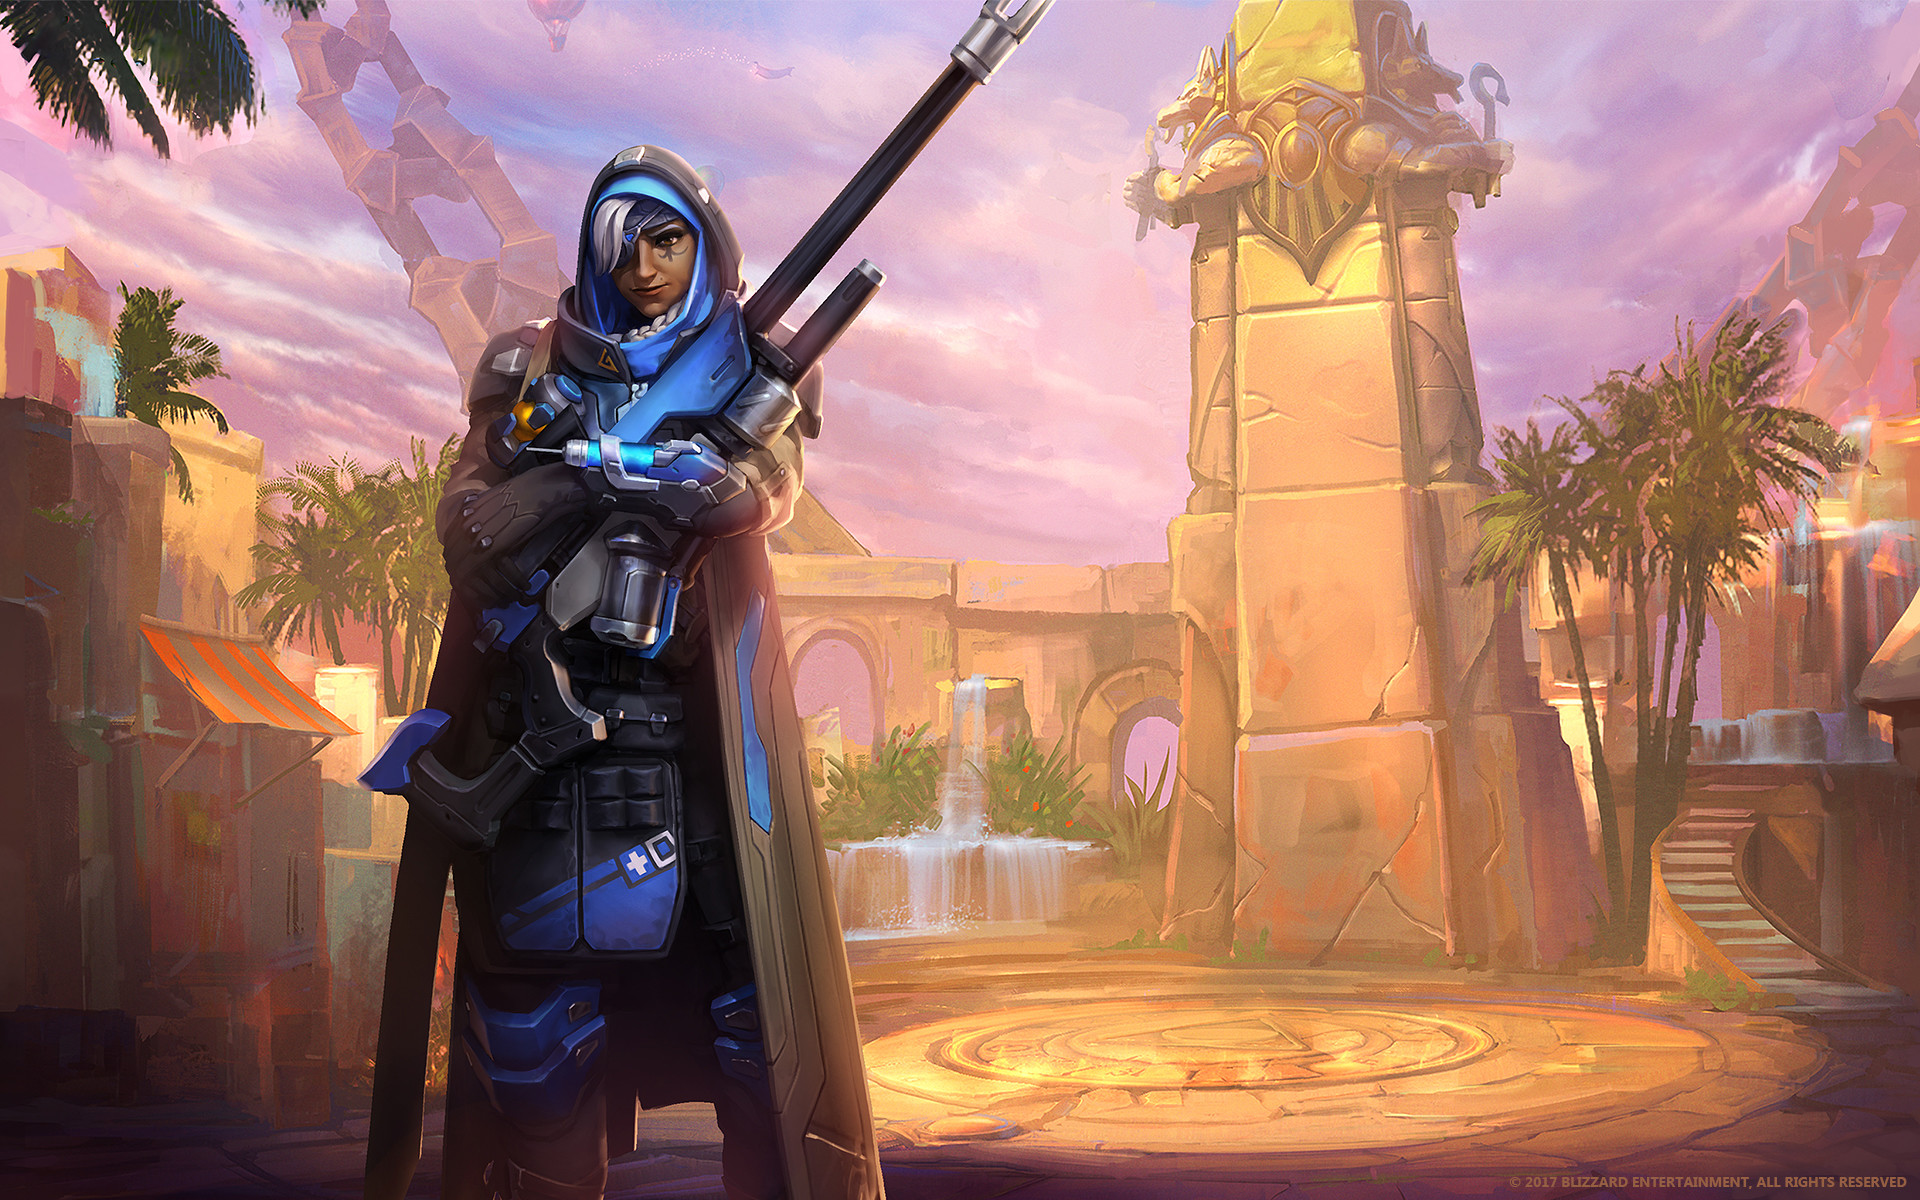 Desktop Wallpaper Ana Overwatch Sniper Online Game Hd Image Picture Background 014a